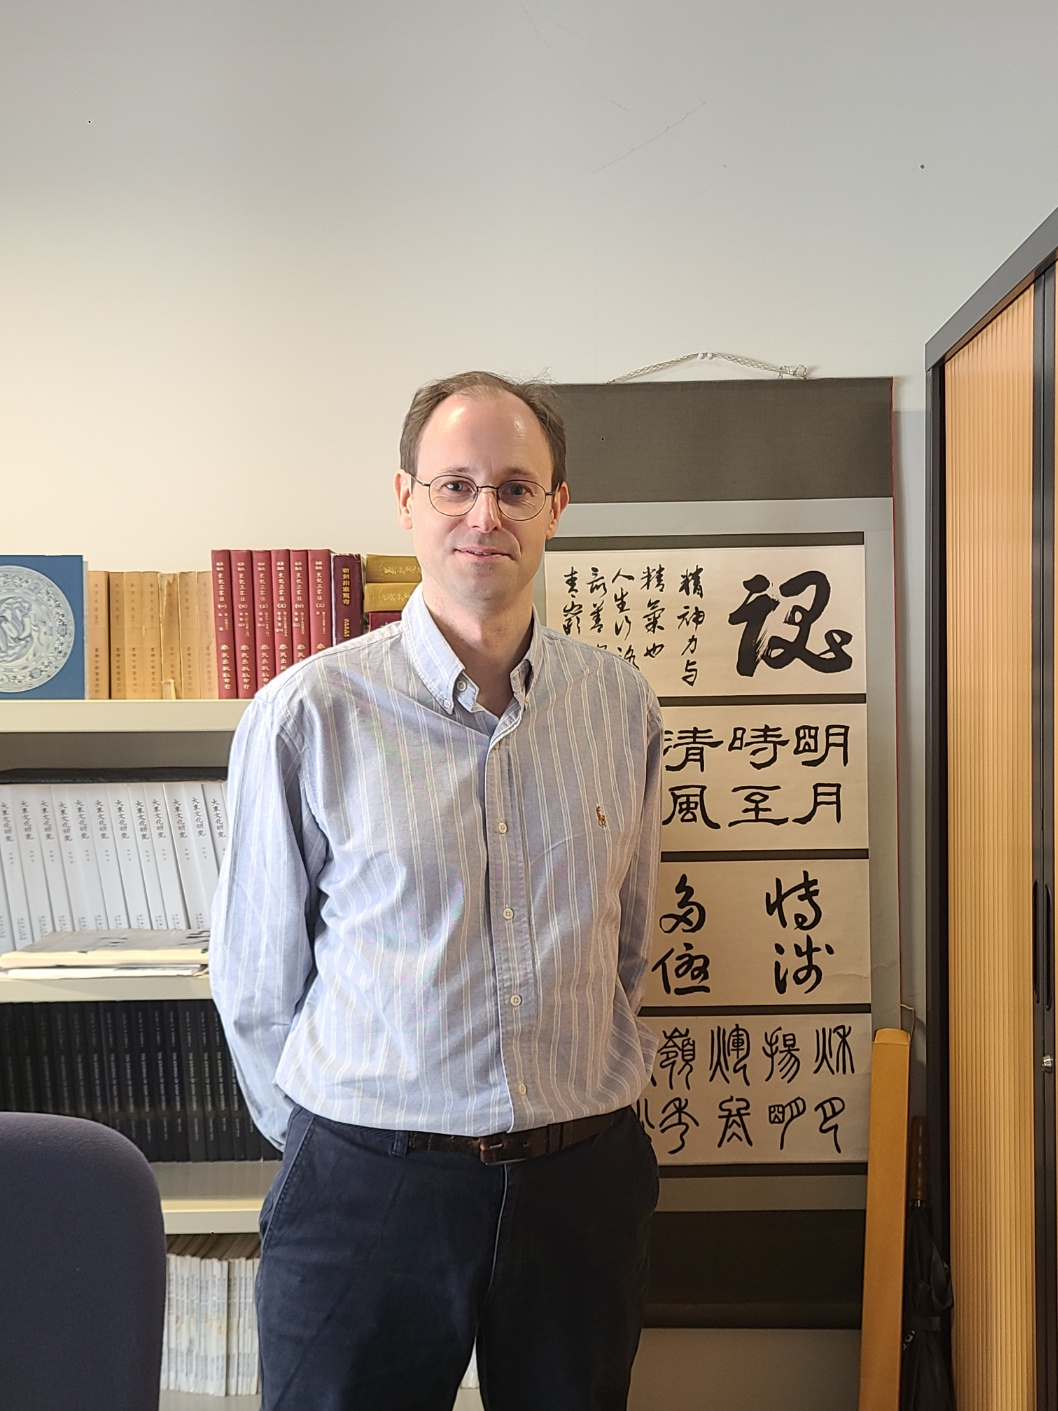 Pierre-Emmanuel Roux, an associate professor of East Asian history at Paris Cite University, poses for a photo during an interview held at the university on Sept. 25. (Jung Min-kyung/The Korea Herald)